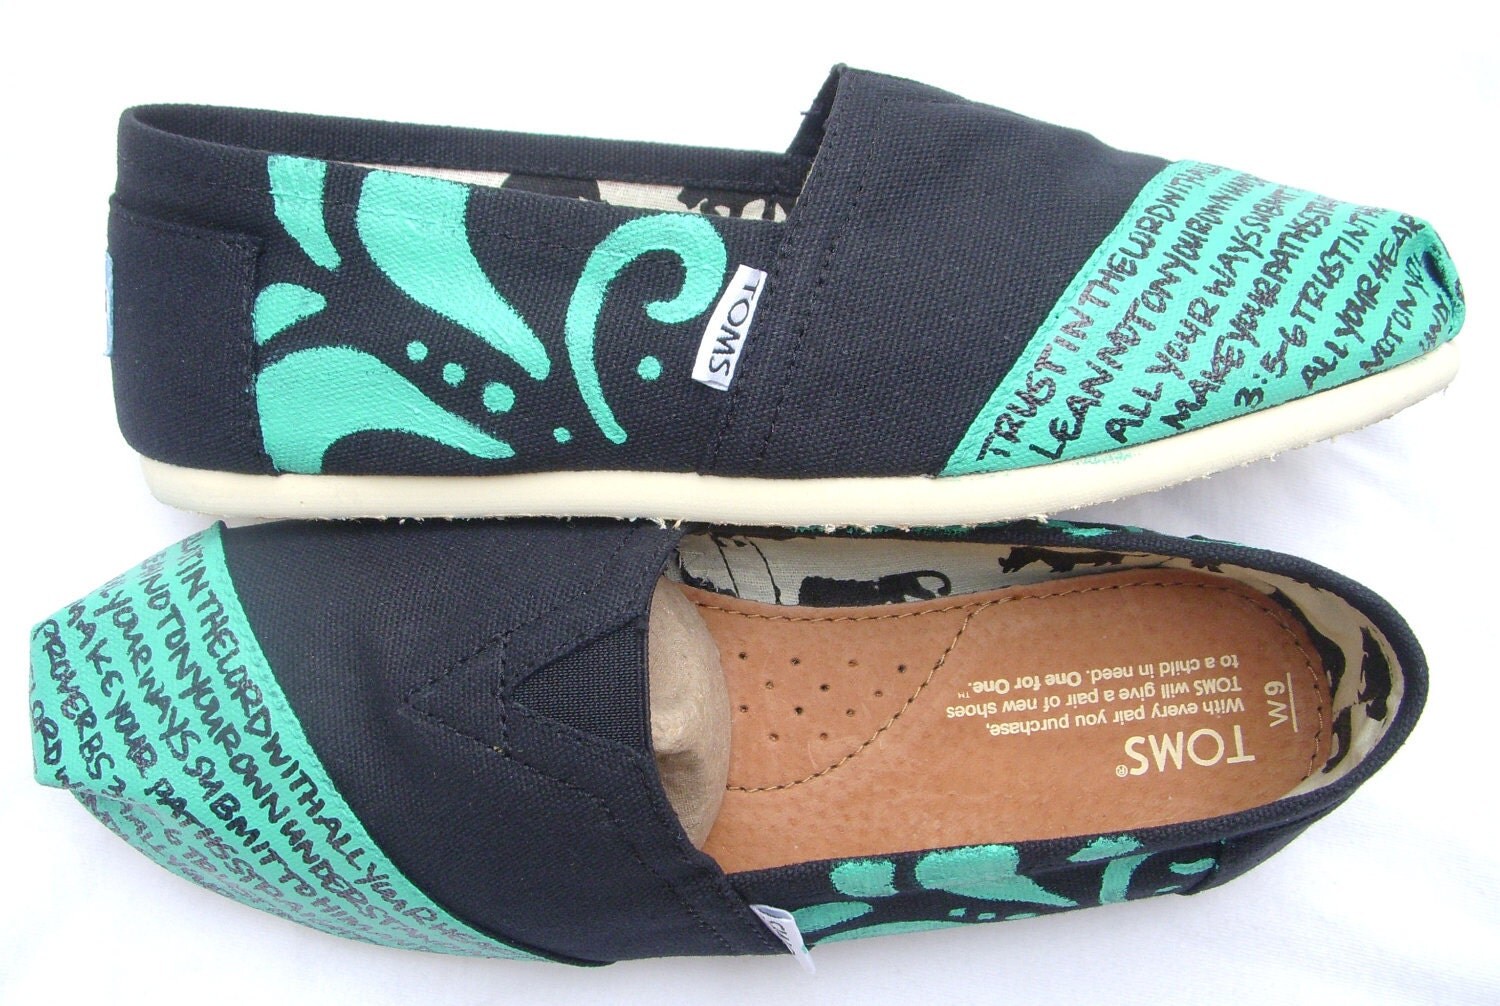 wanting new shoes. Maybe some fun TOMS that I can paint.